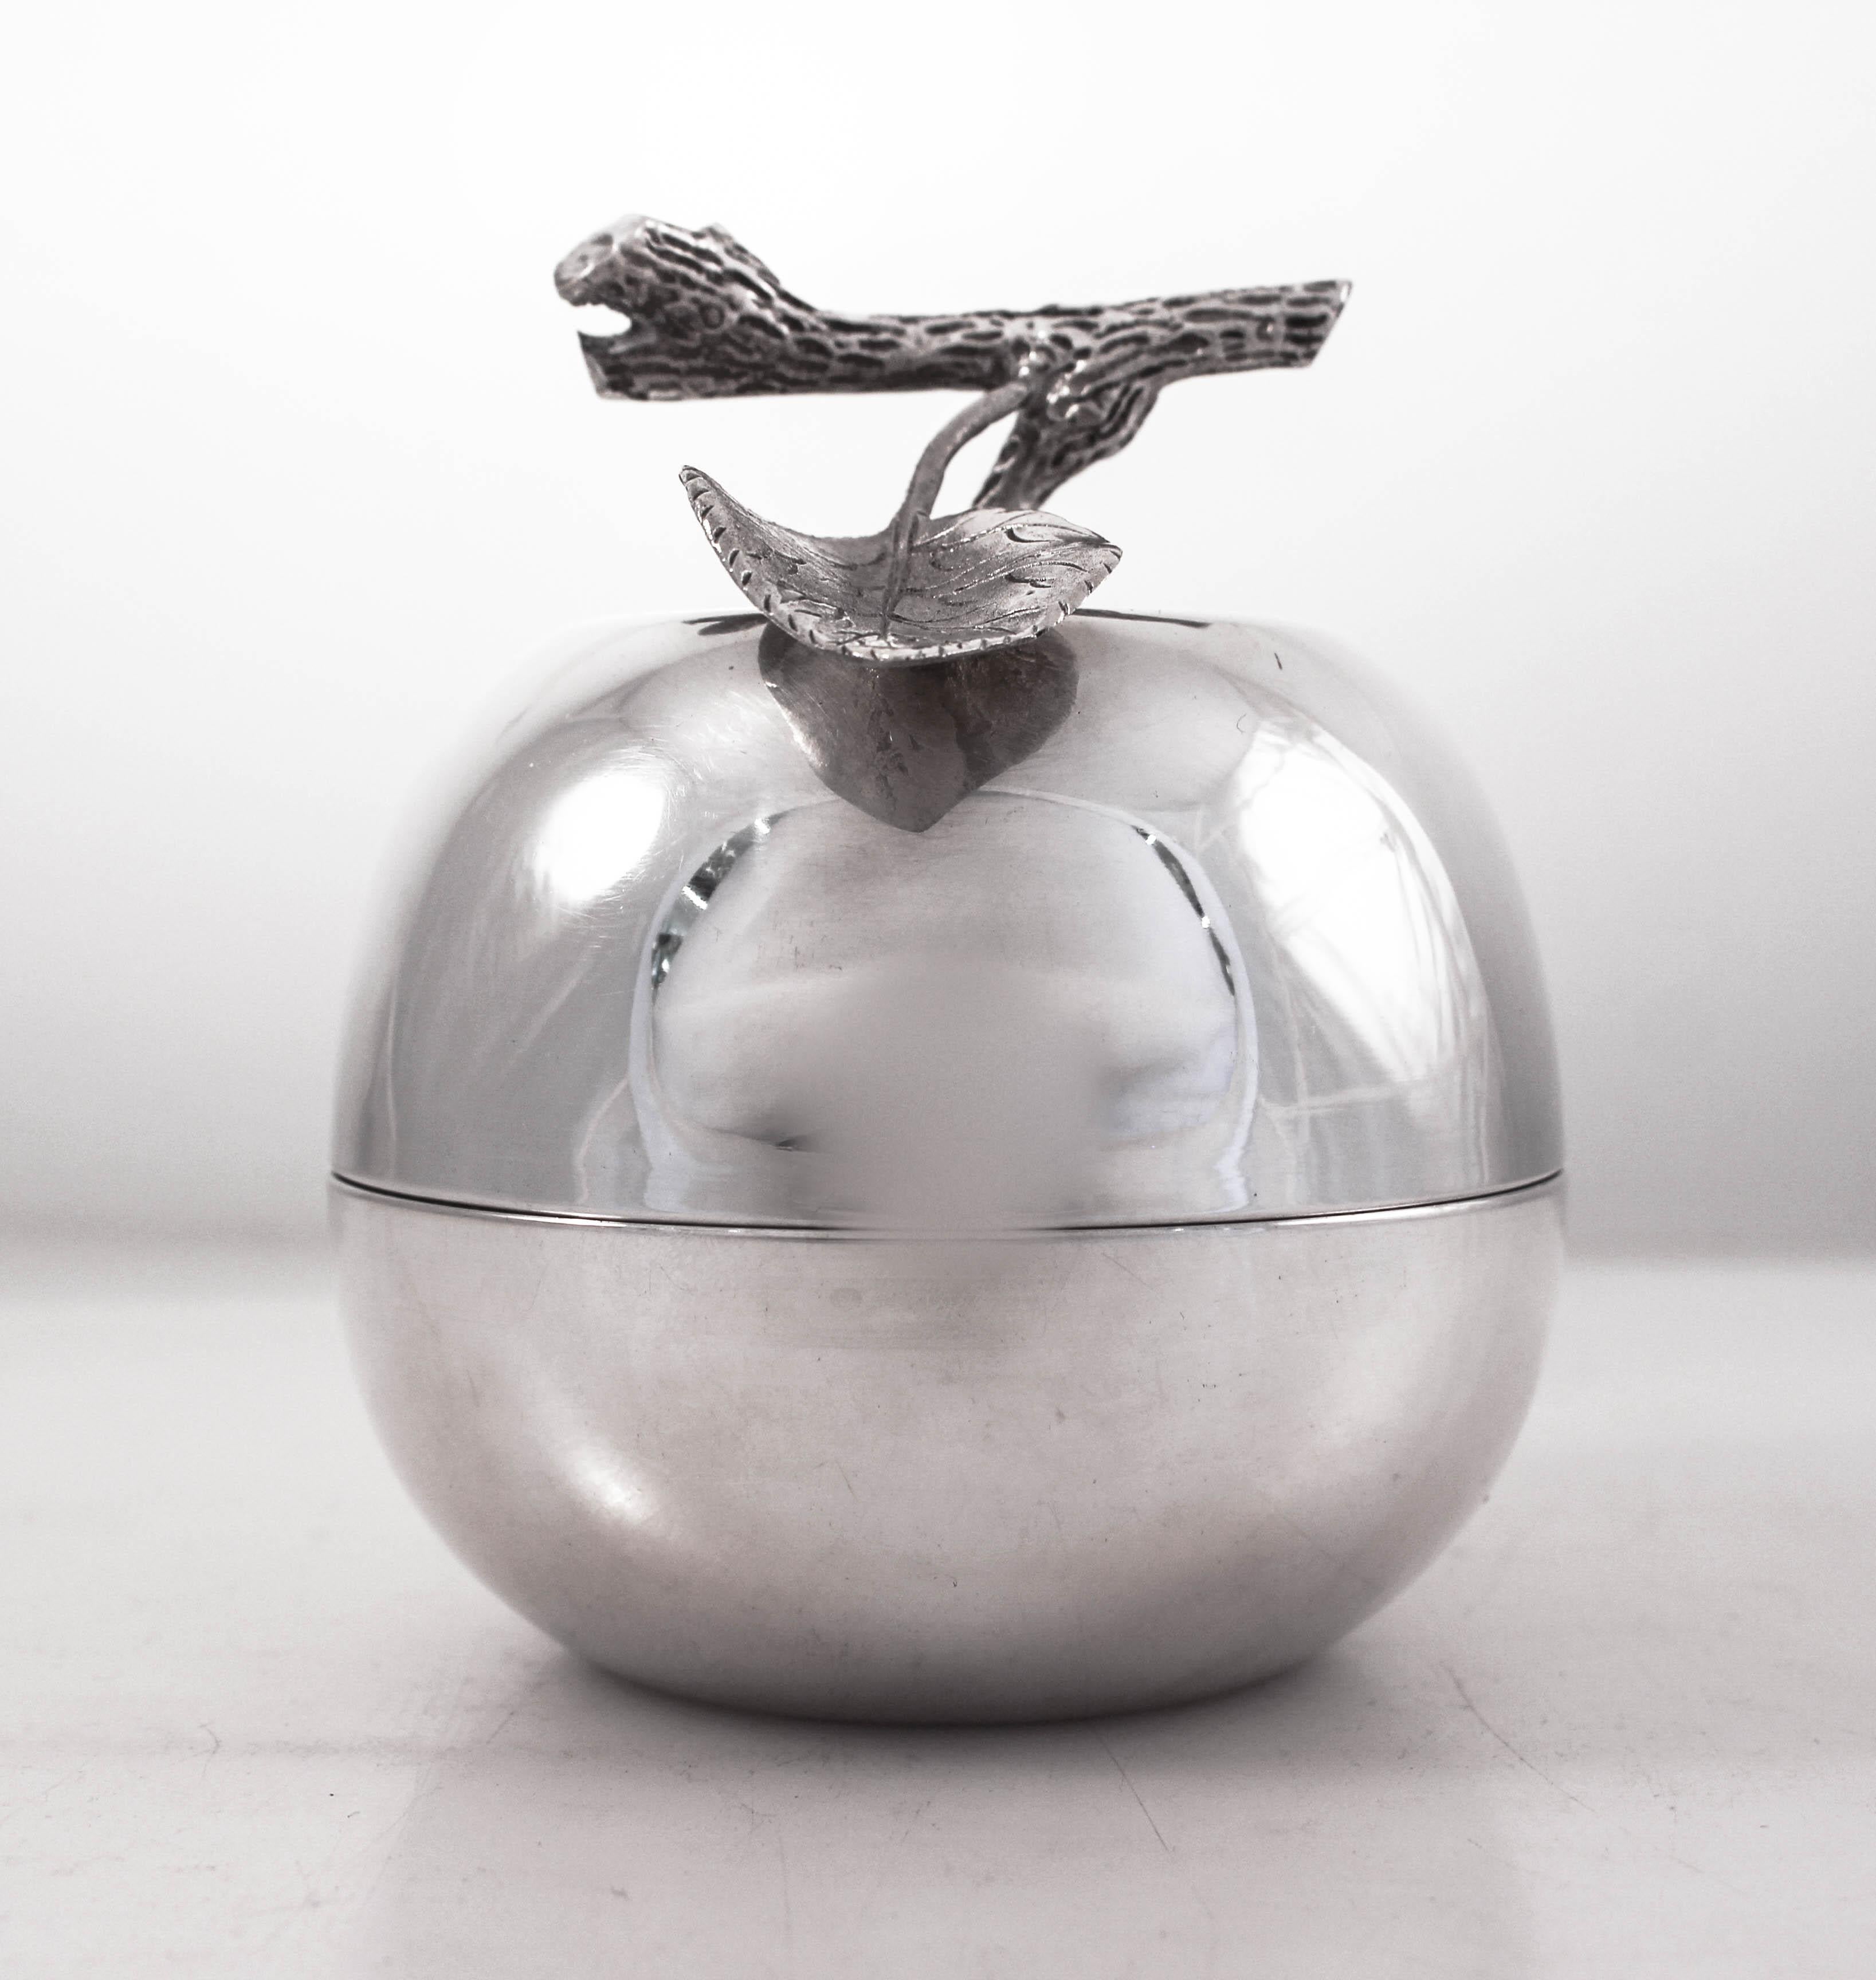 Being offered, one-of-a-kind sterling silver apple jar. Inside is the original tight-fitting crystal liner. It has a diamond pattern and is a thick piece of crystal. Remove it for easy cleaning. Honey, jam, syrup, or anything else you choose to fill